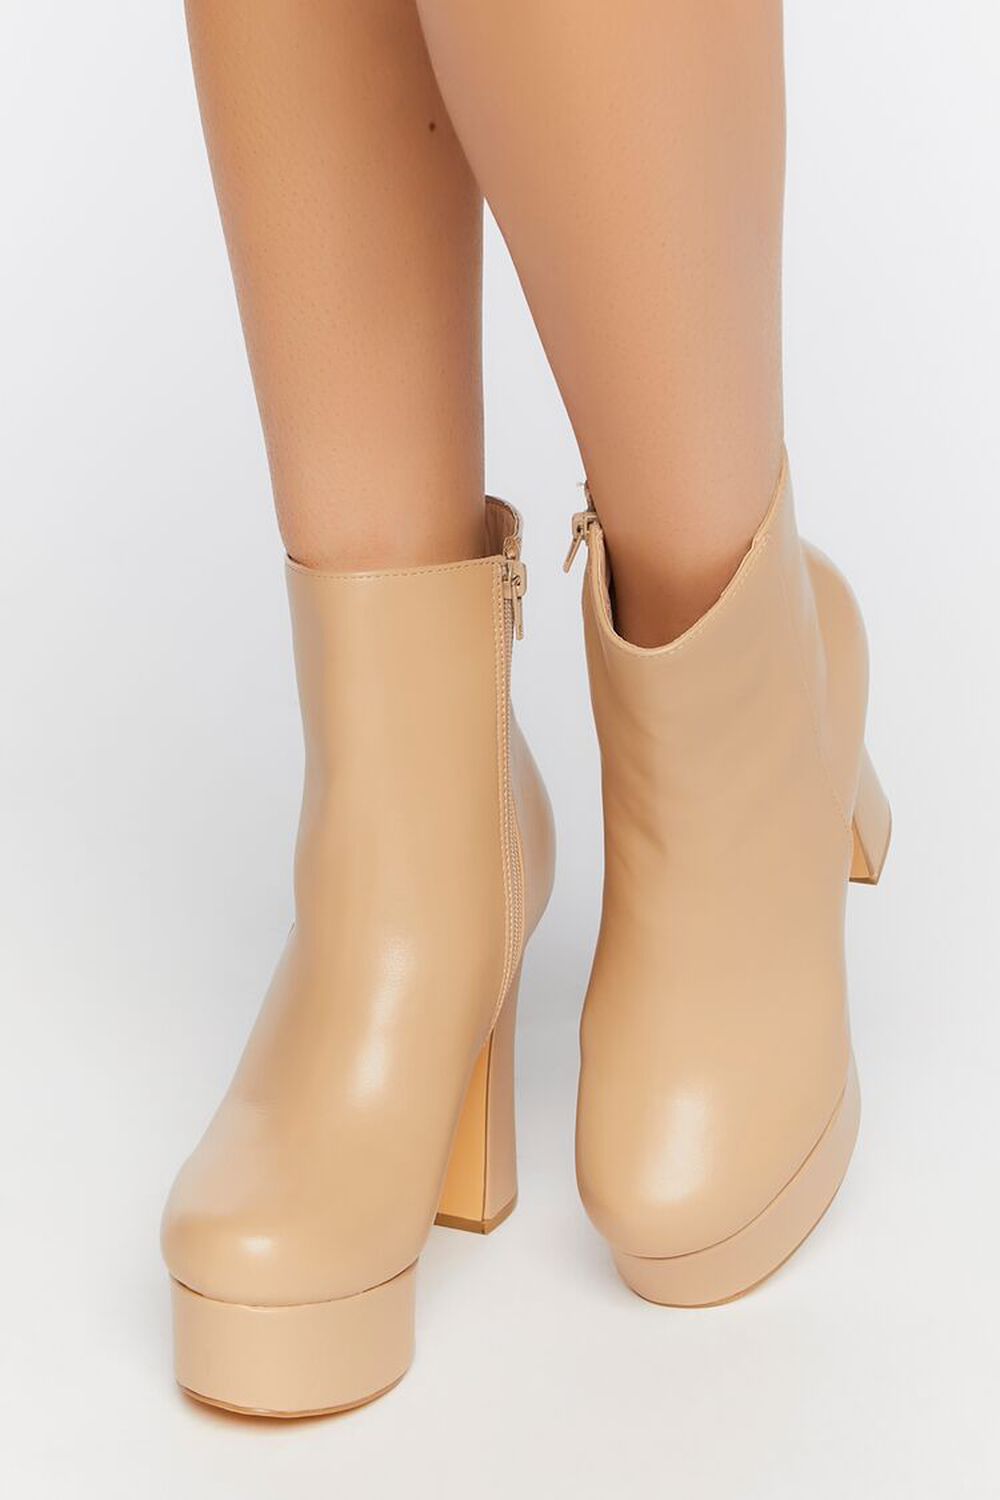 NUDE Faux Leather Platform Booties, image 1